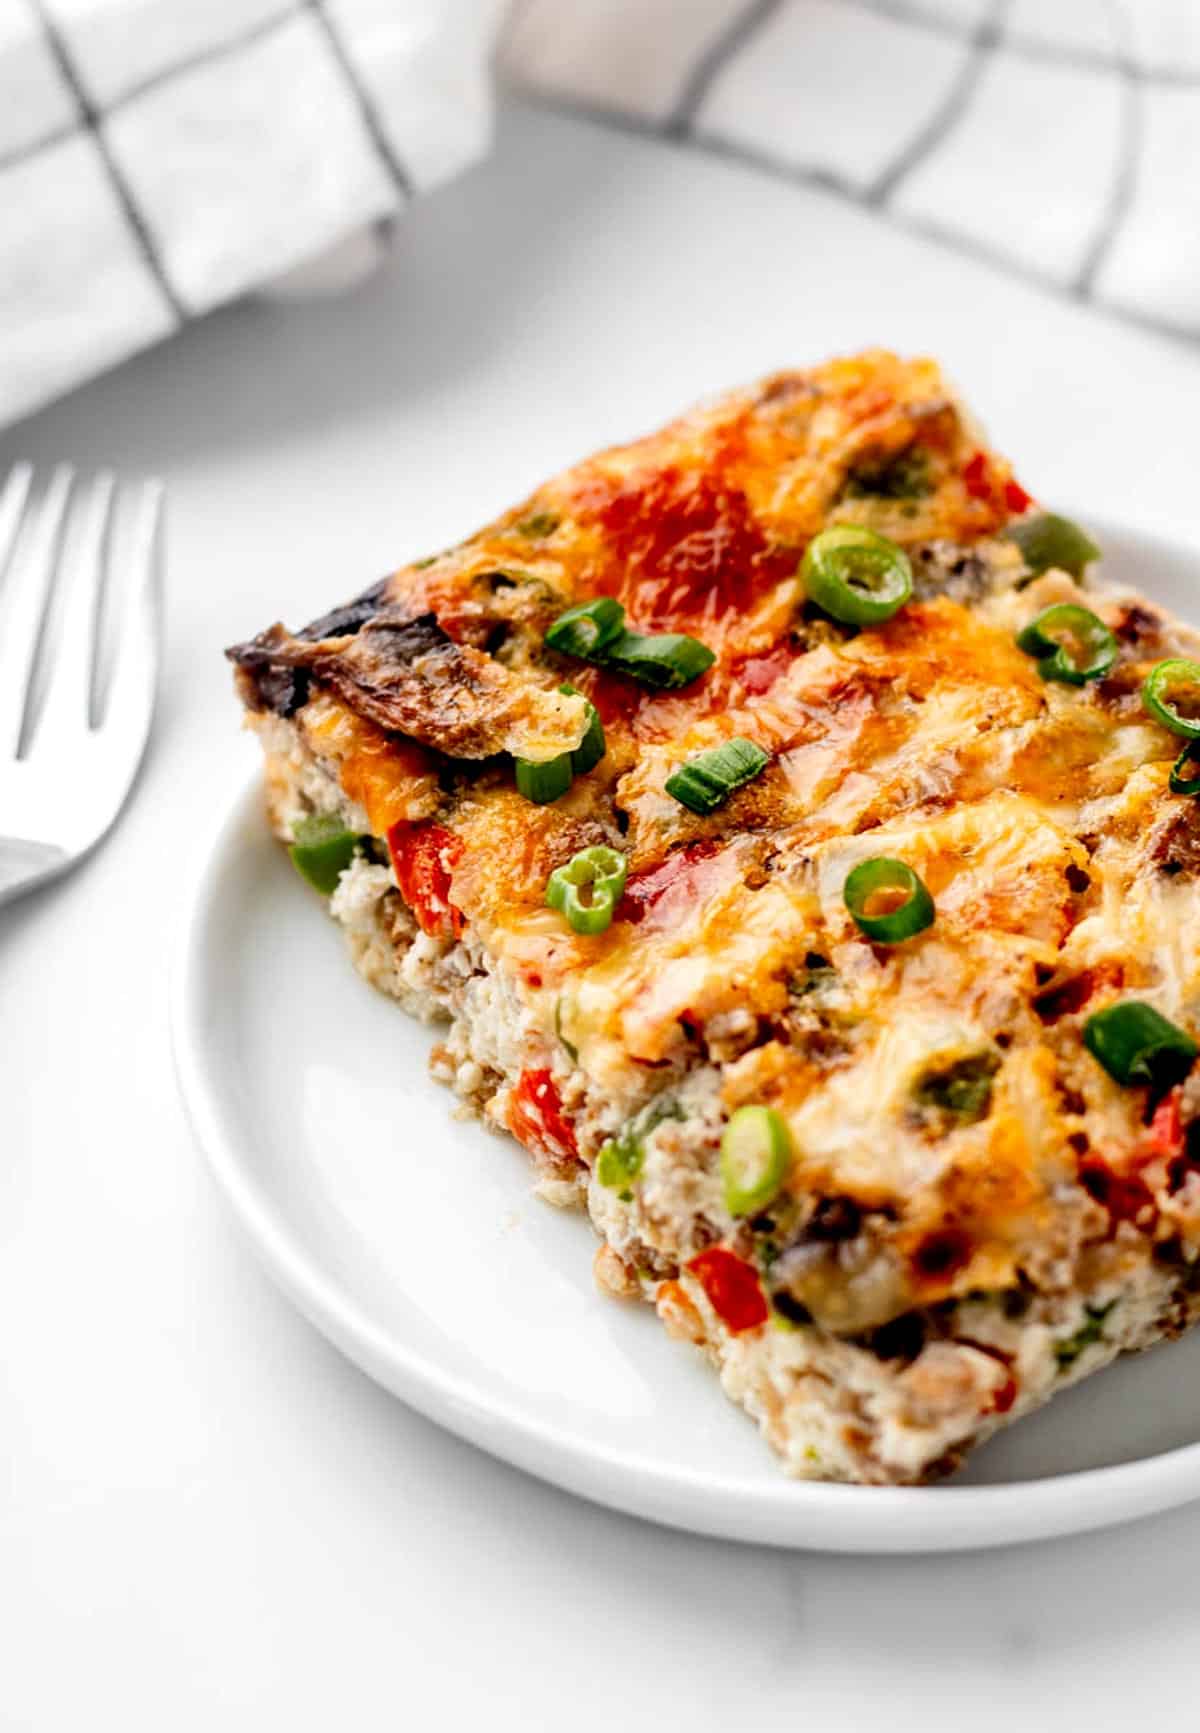 A slice of egg white and sausage breakfast casserole on a white plate.